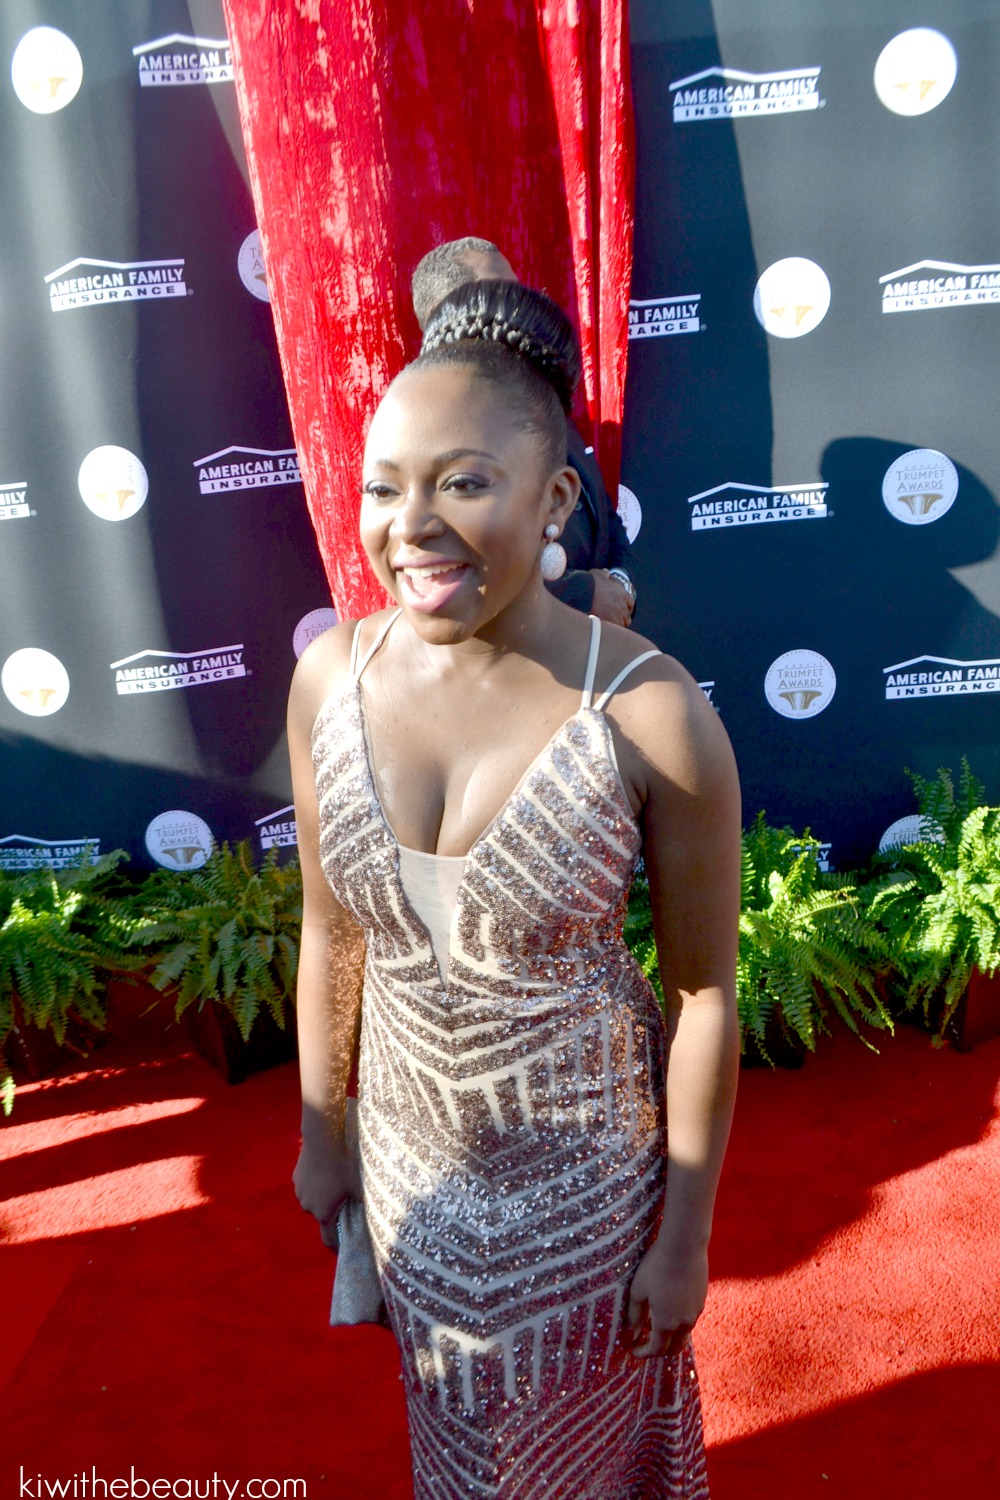 trumpet-awards-23rd-annual-2015-1